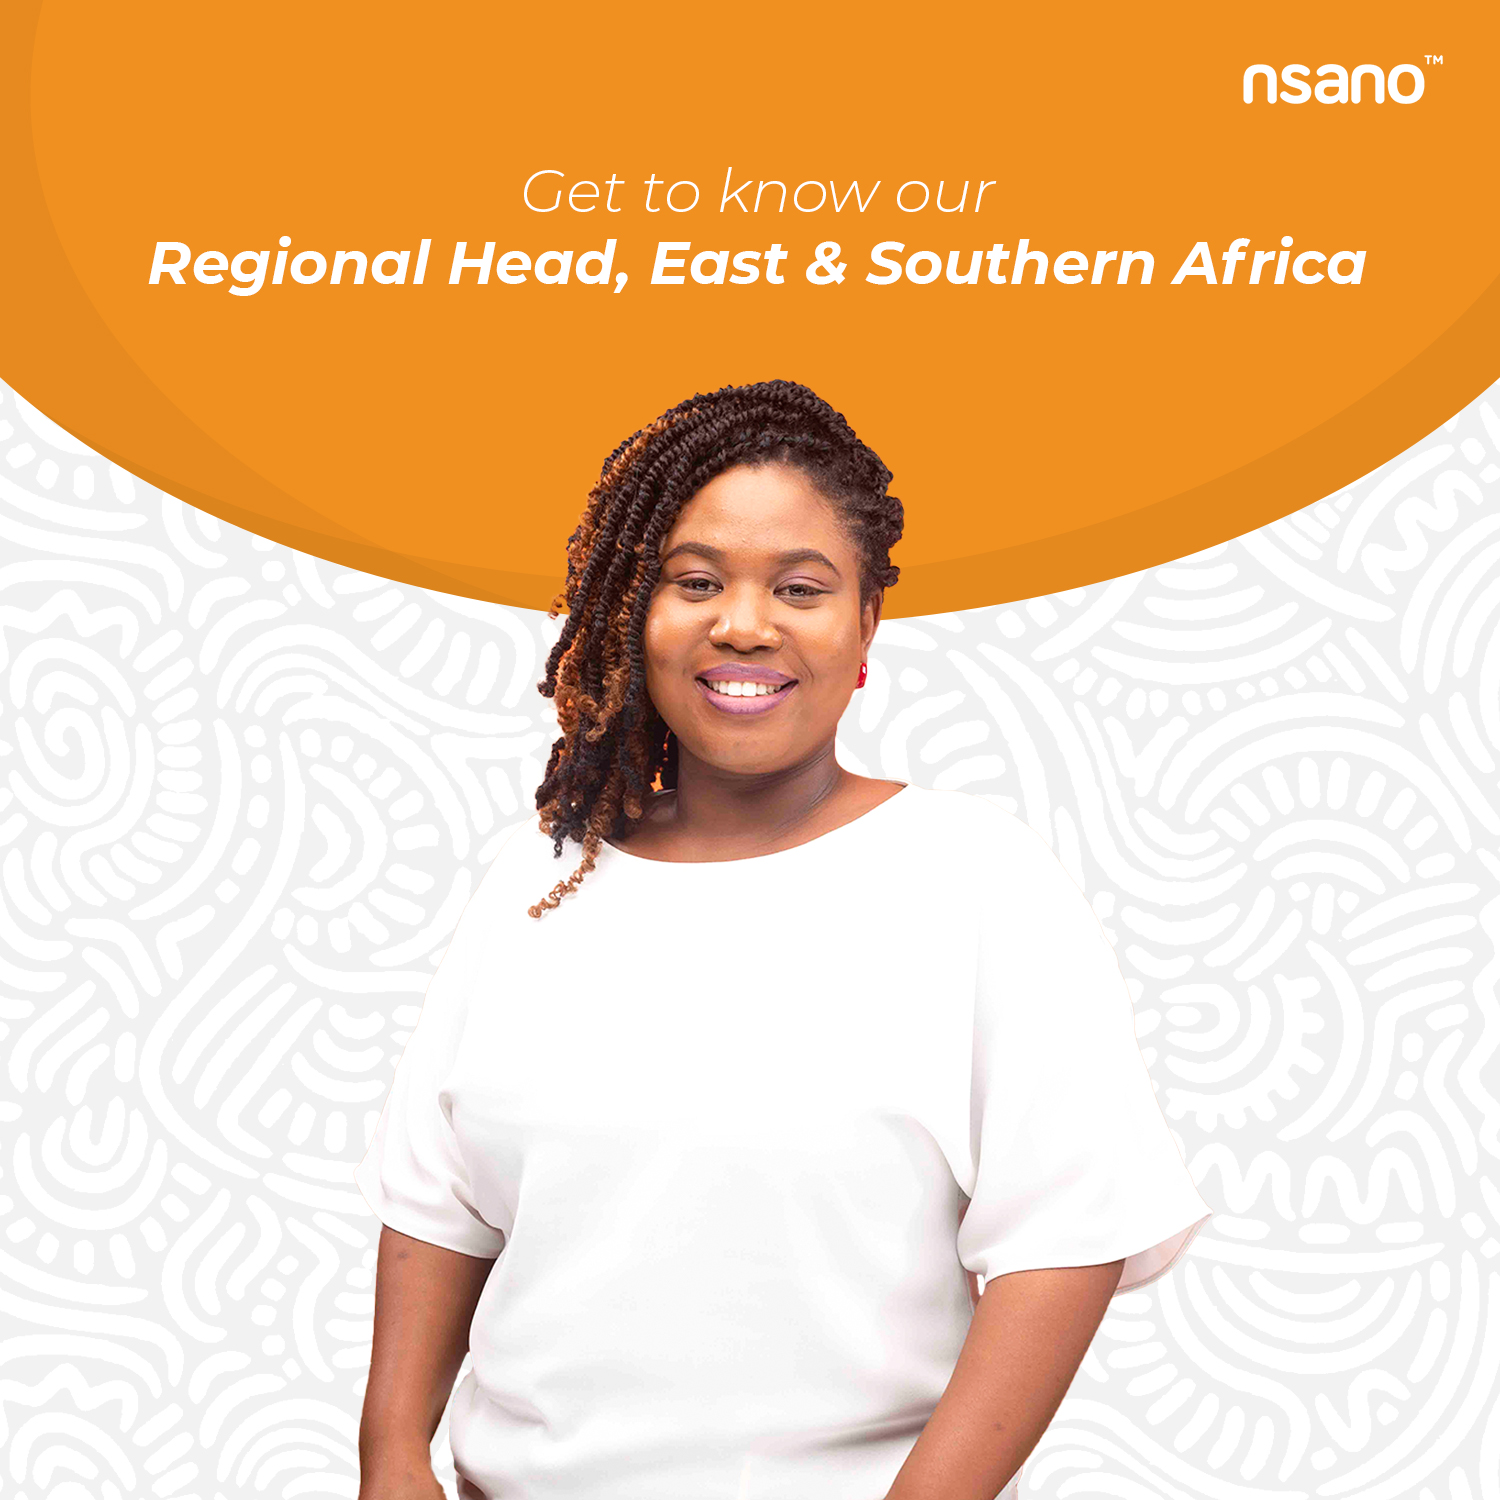 Image of Nsano Regional Head for East and Southern Africa